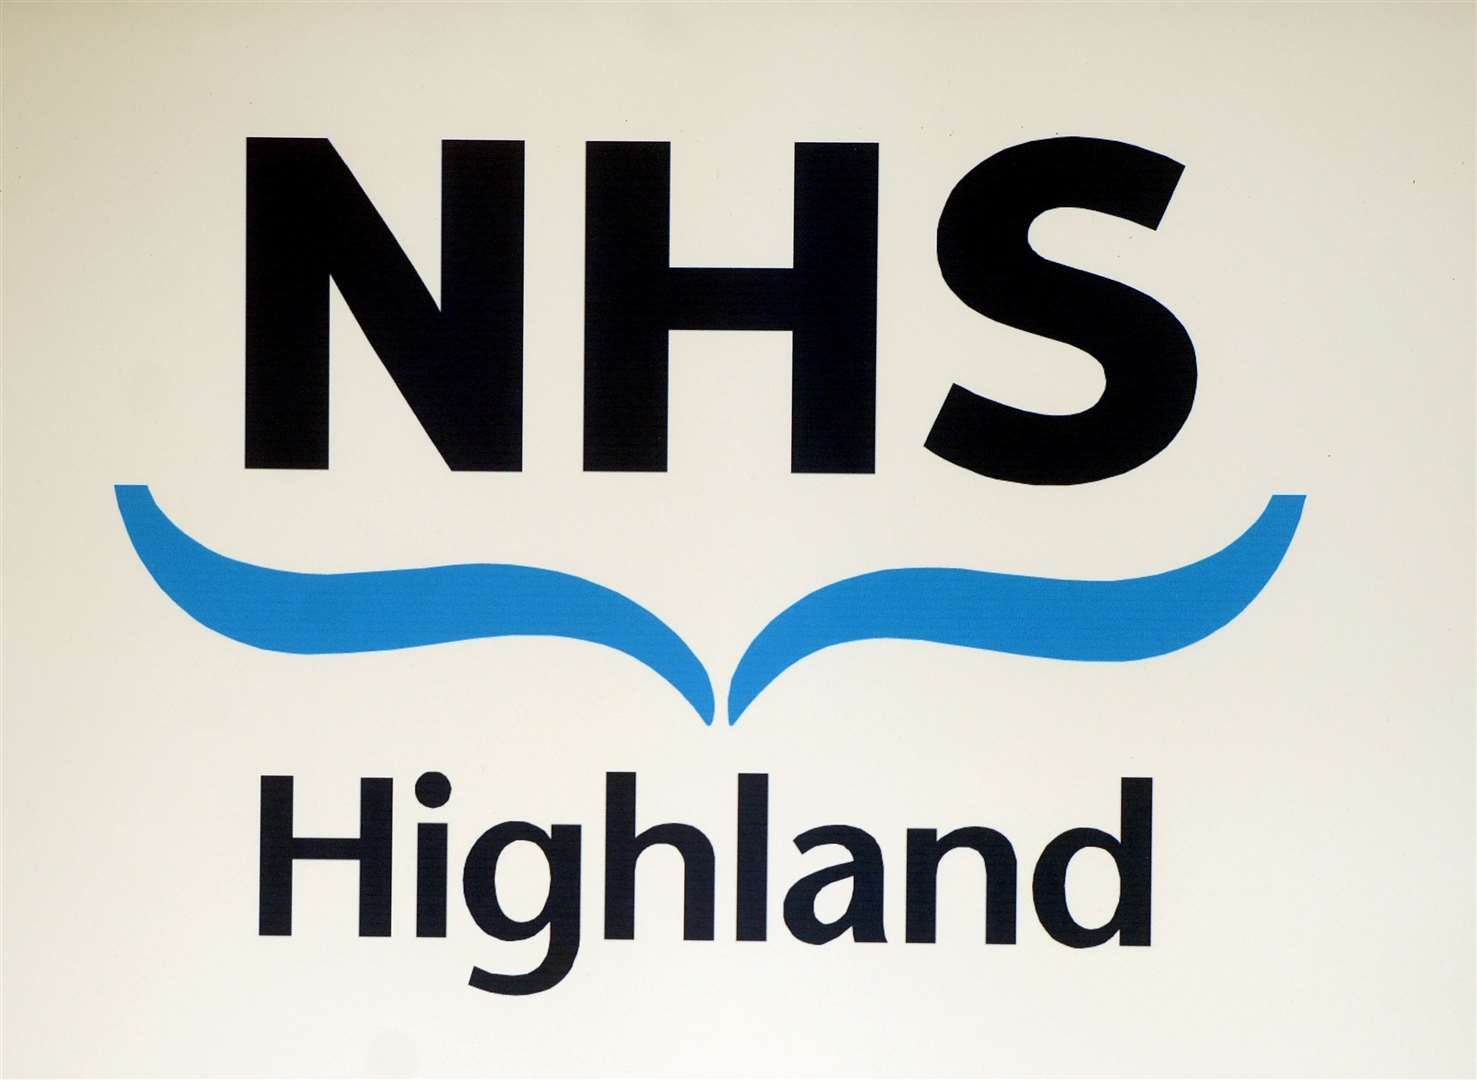 Health bosses say people need to remain vigilant as coronavirus cases in the Highlands remain low.